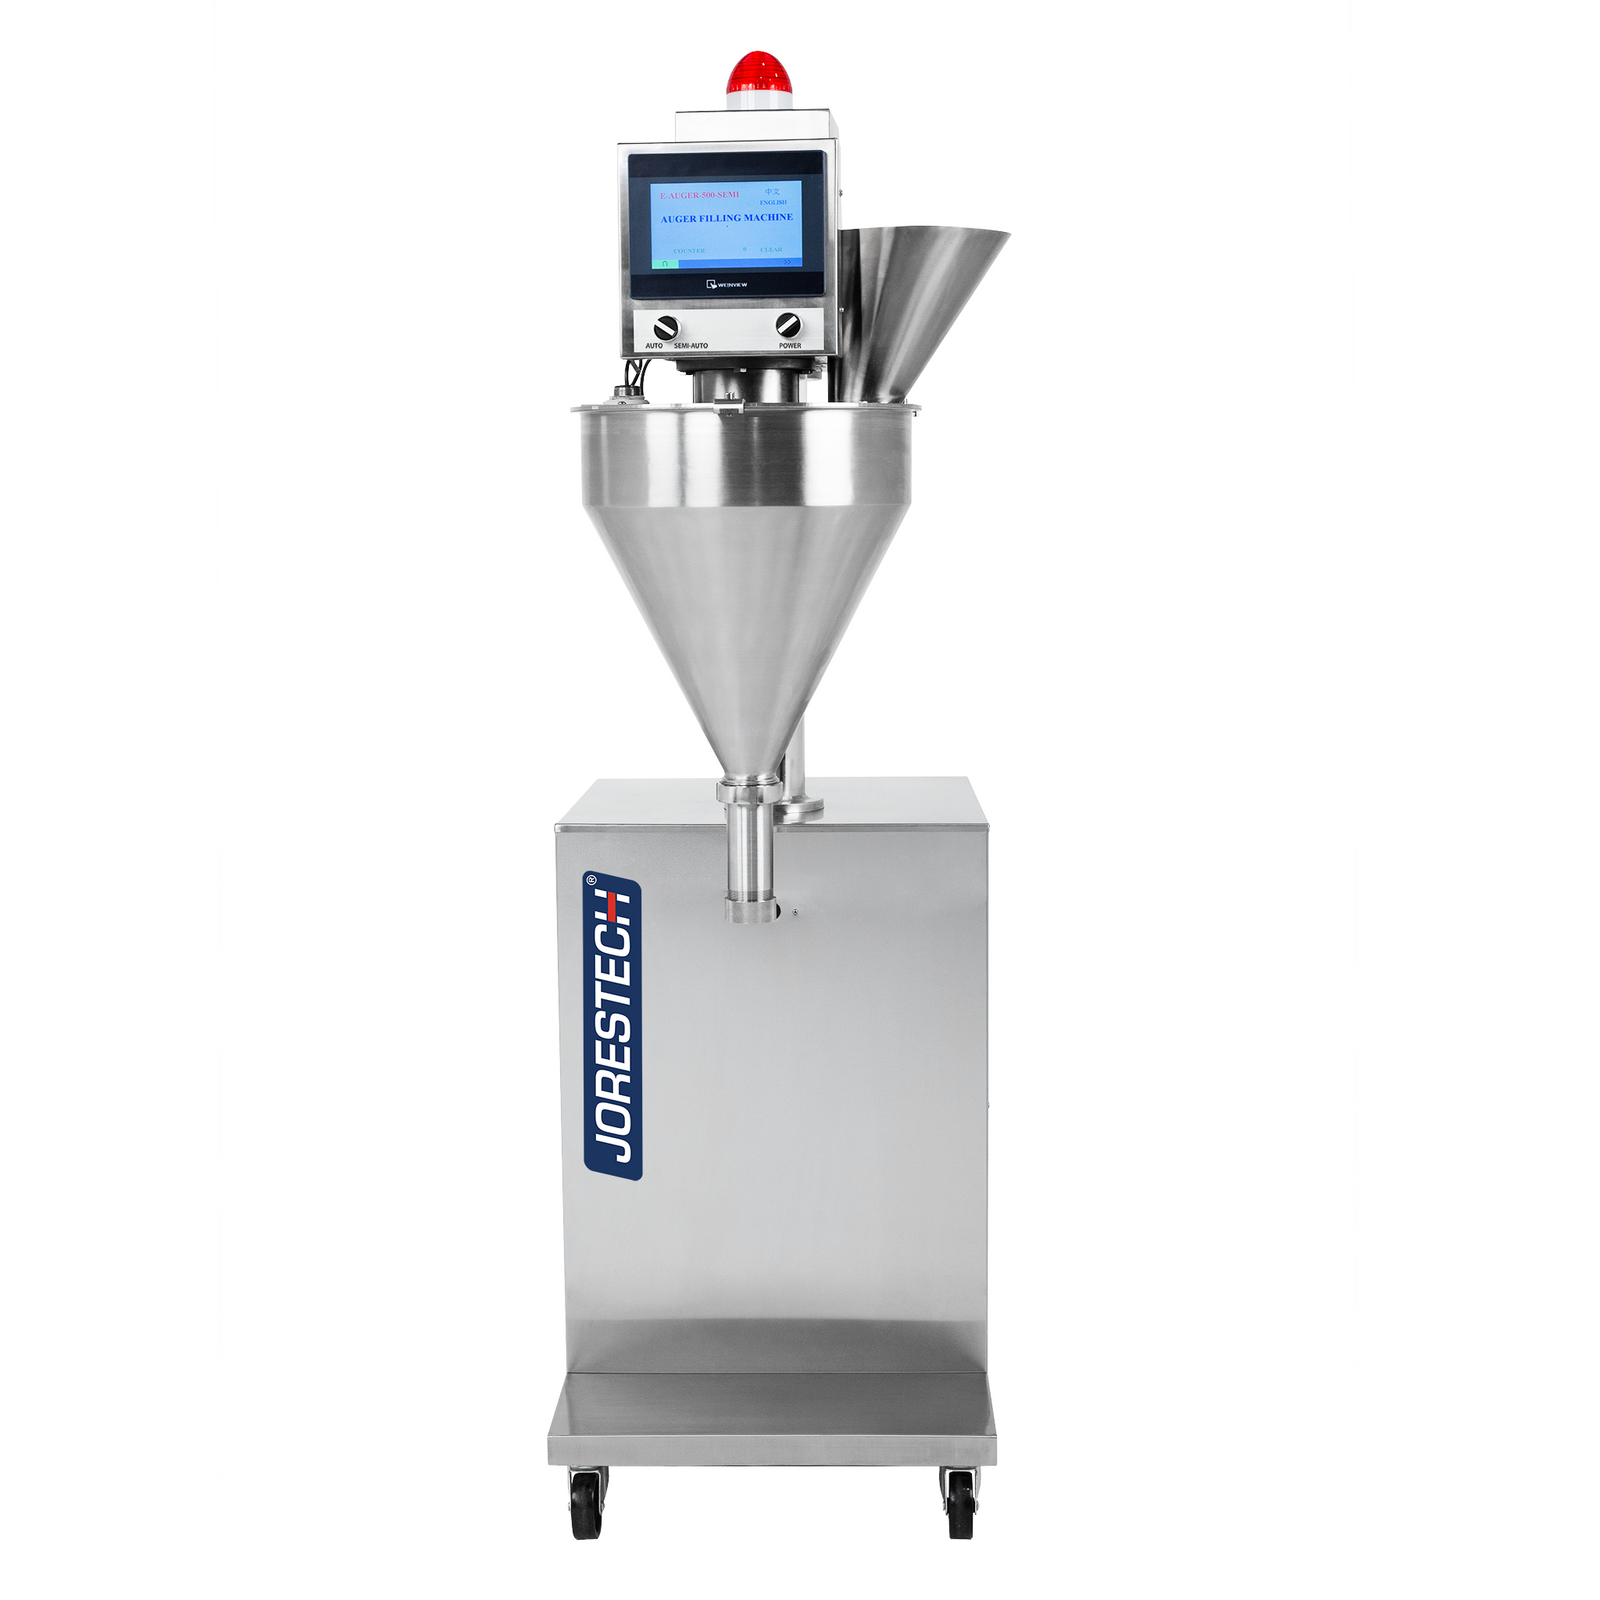 Front view of a stainless steel semi-automatic powder dispensing machine. Digital control panel on the machine is turned on.